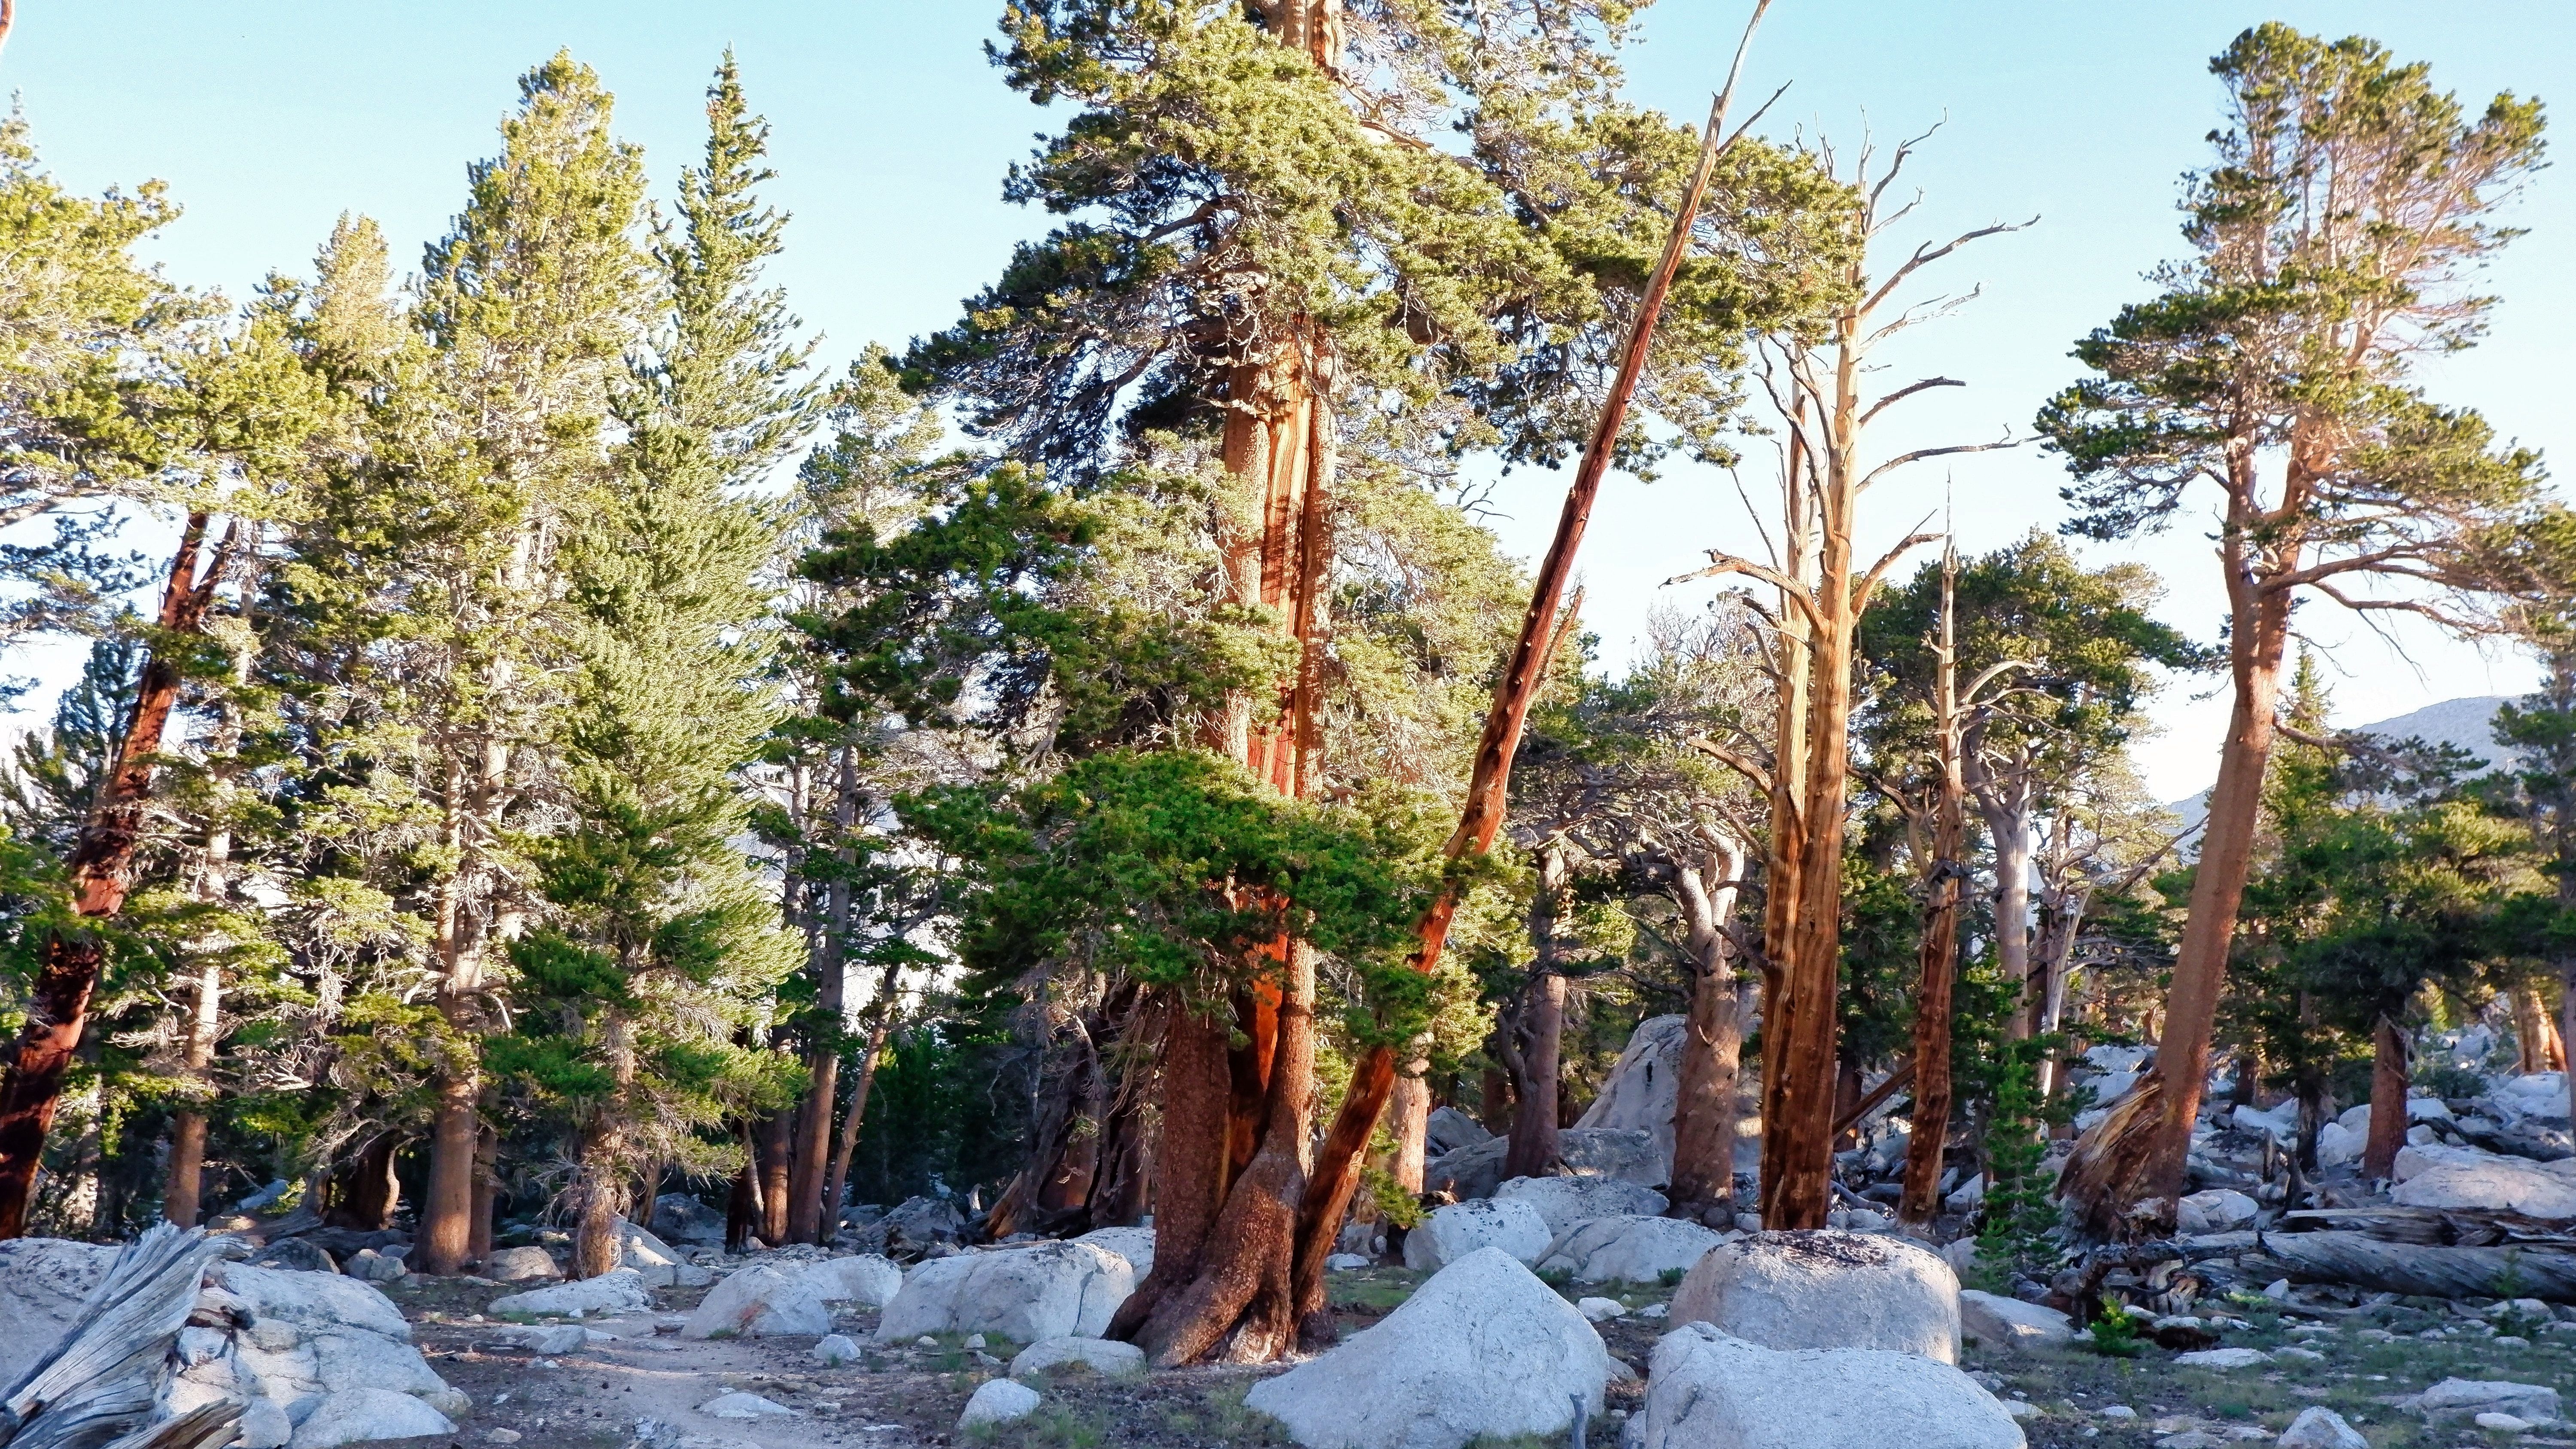 Green and brown trees in the Inyo Mountains in California, USA